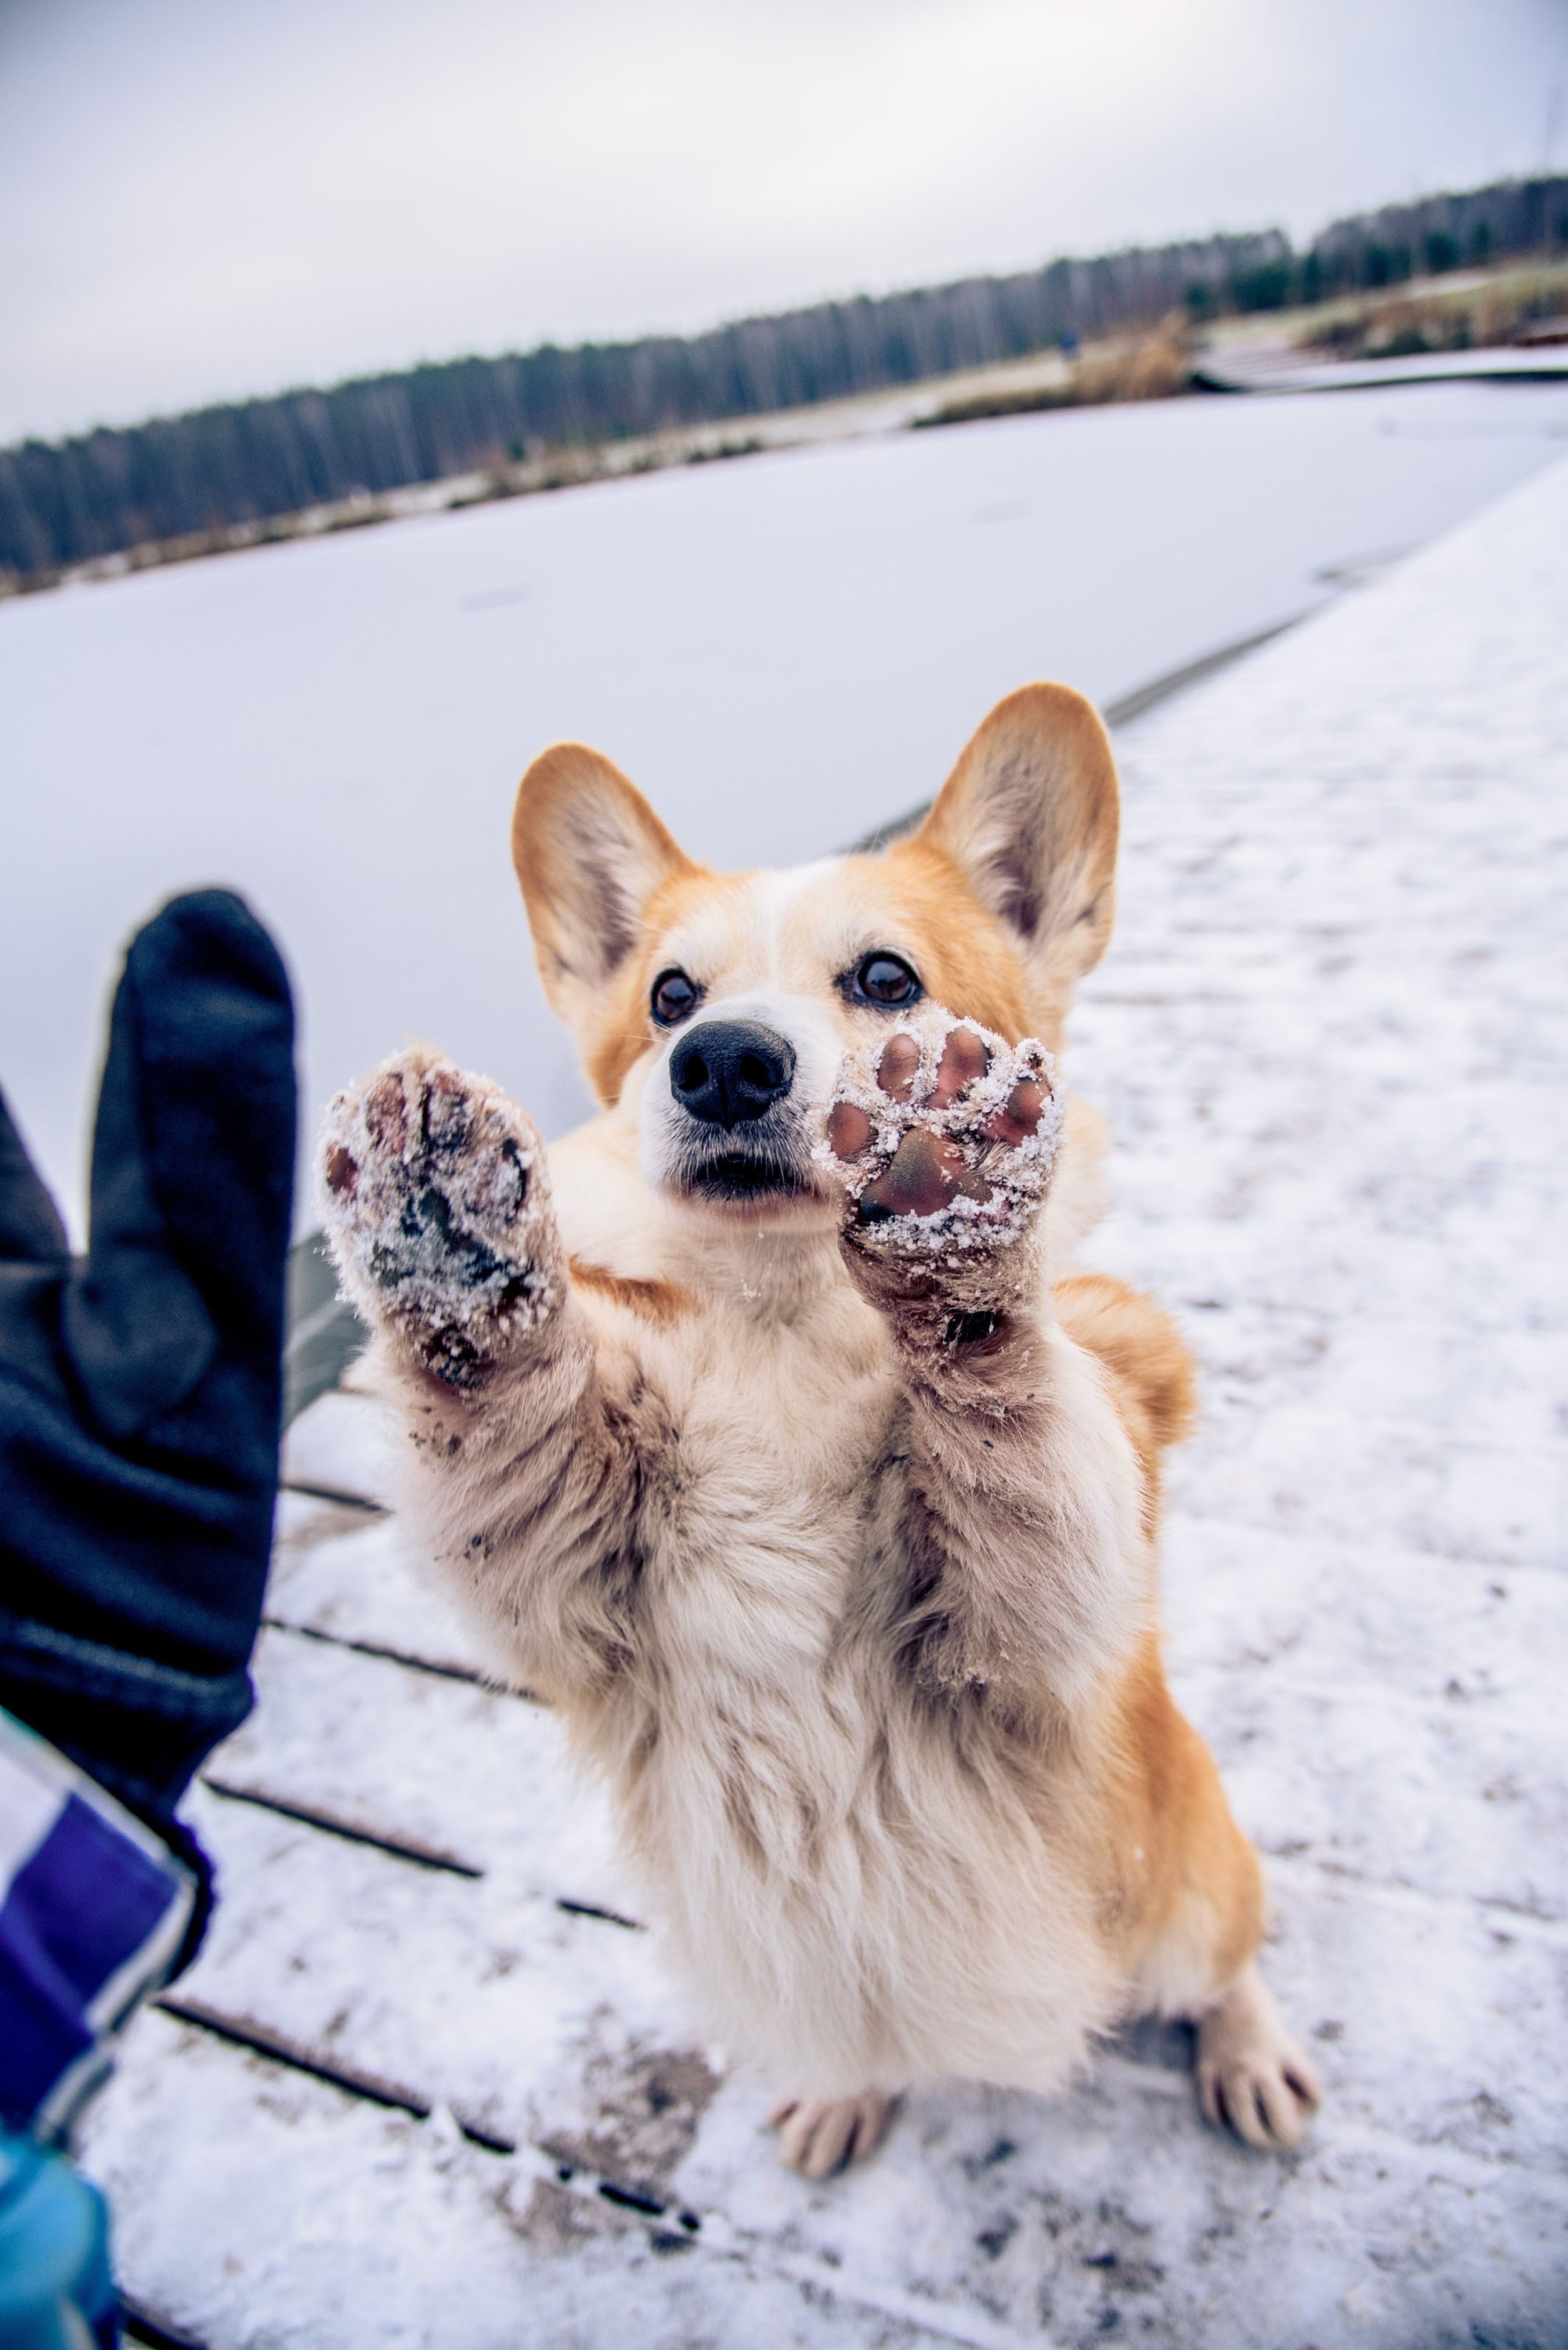 Snow can turn into ice with your dog's body heat and get stuck between its toes. (Shutterstock Photo)